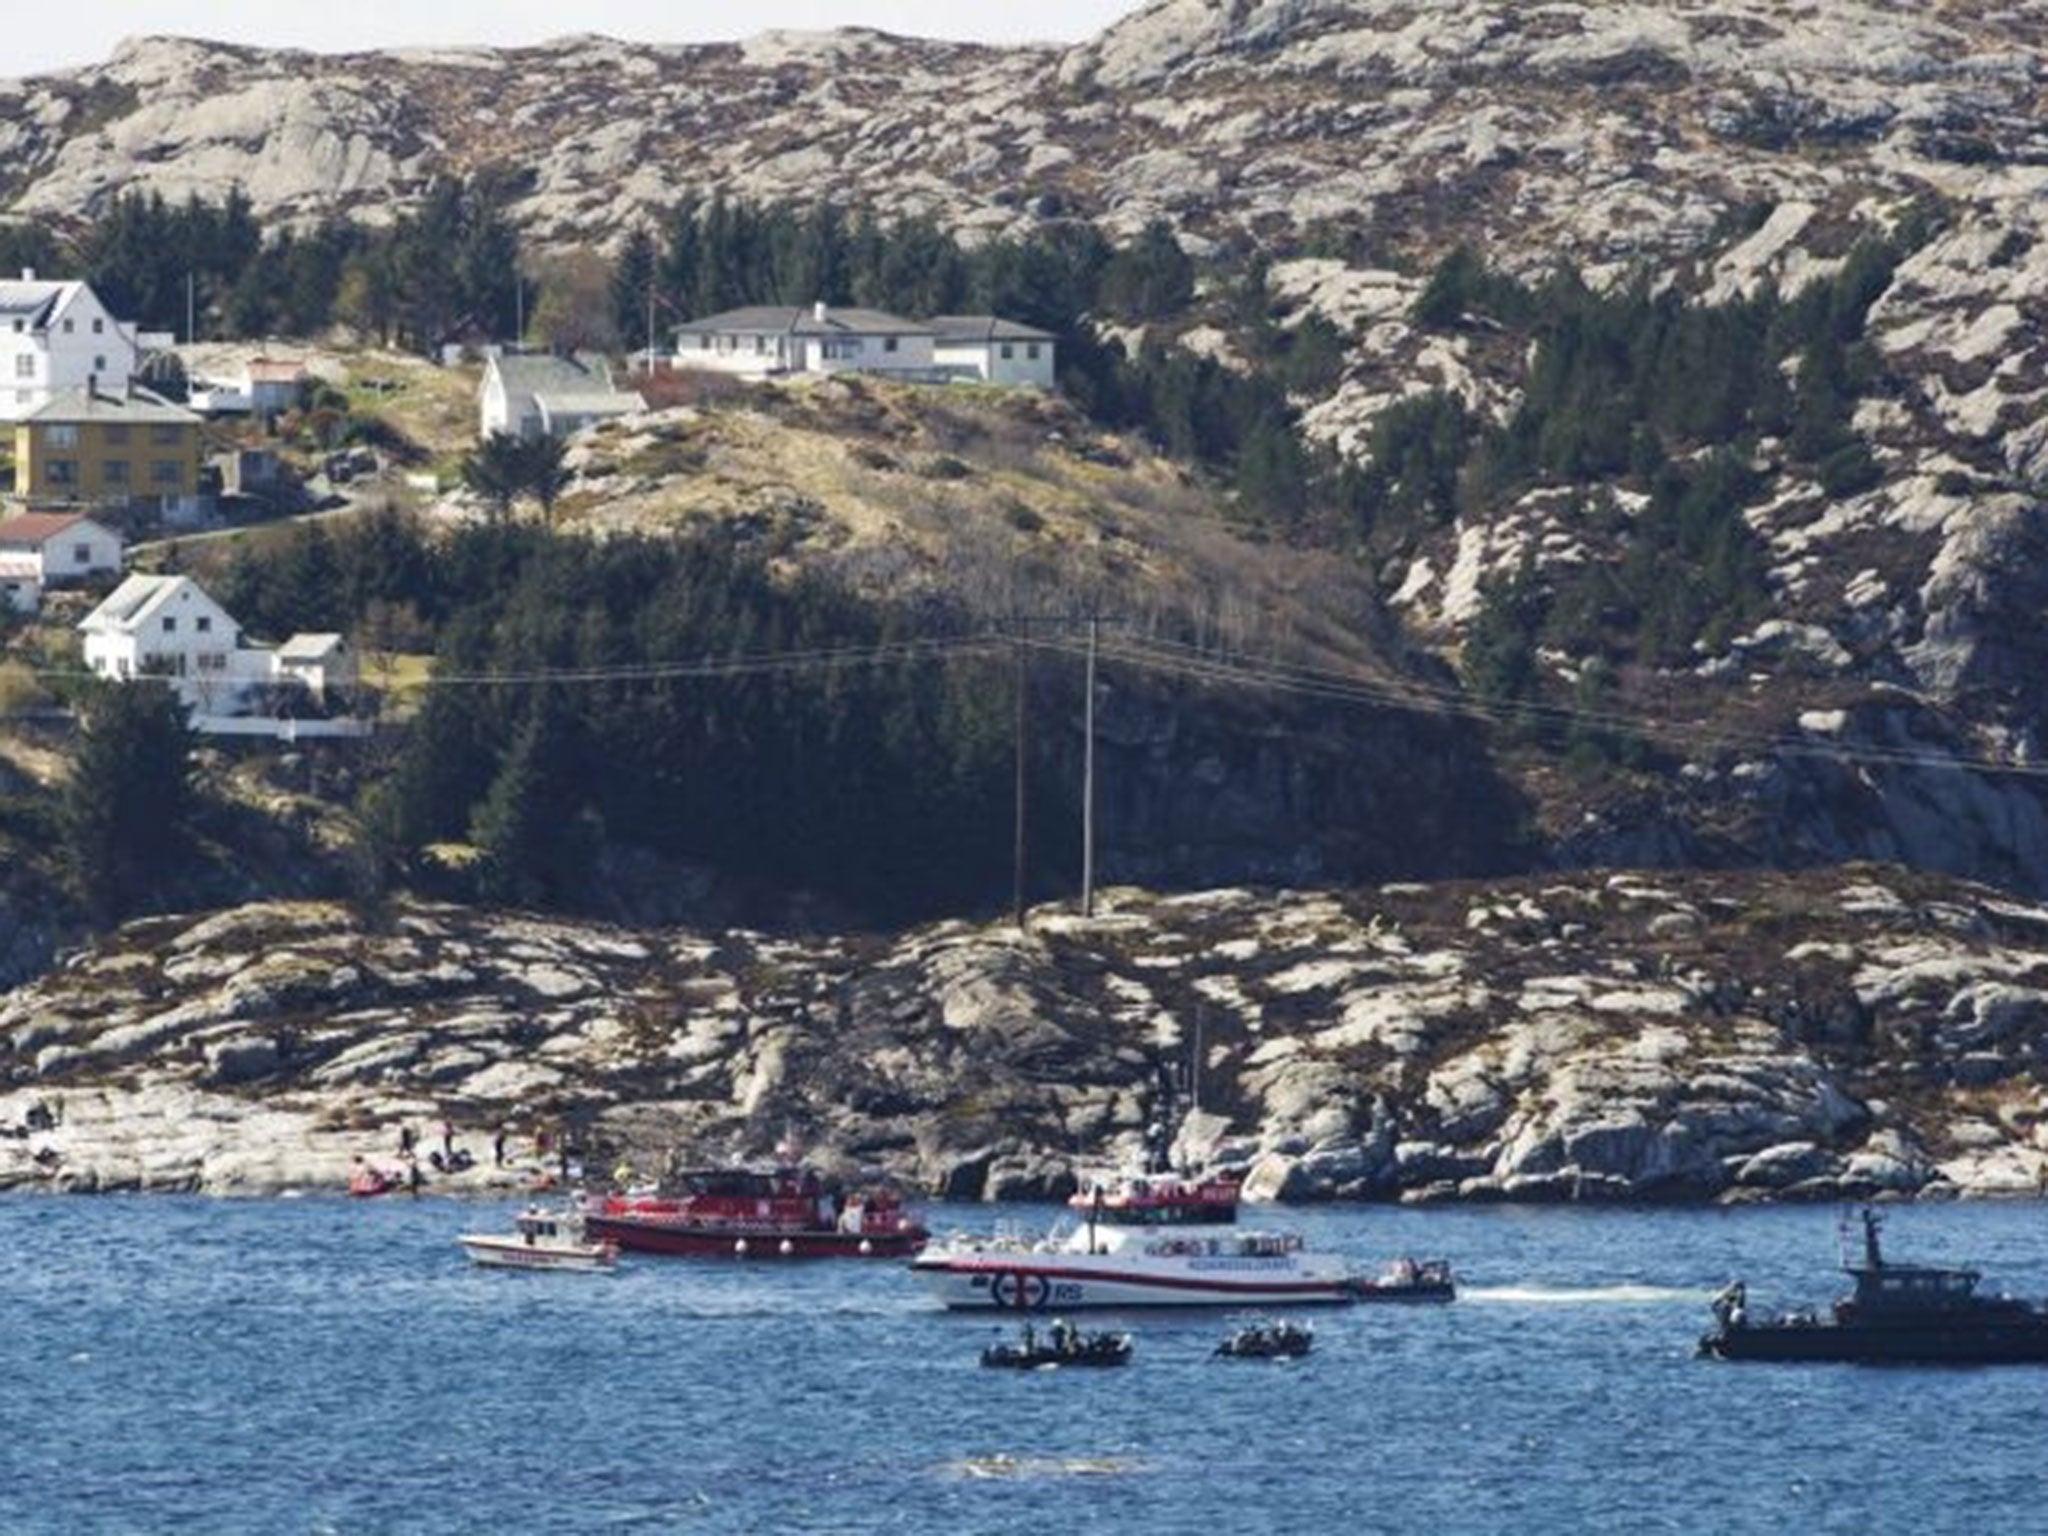 A search and rescue vessel patrols off the island of Turoey, near Bergen, Norway, as emergency workers on the shoreline attend the scene after a helicopter with 13 people on board crashed, Friday 29 April, 2016